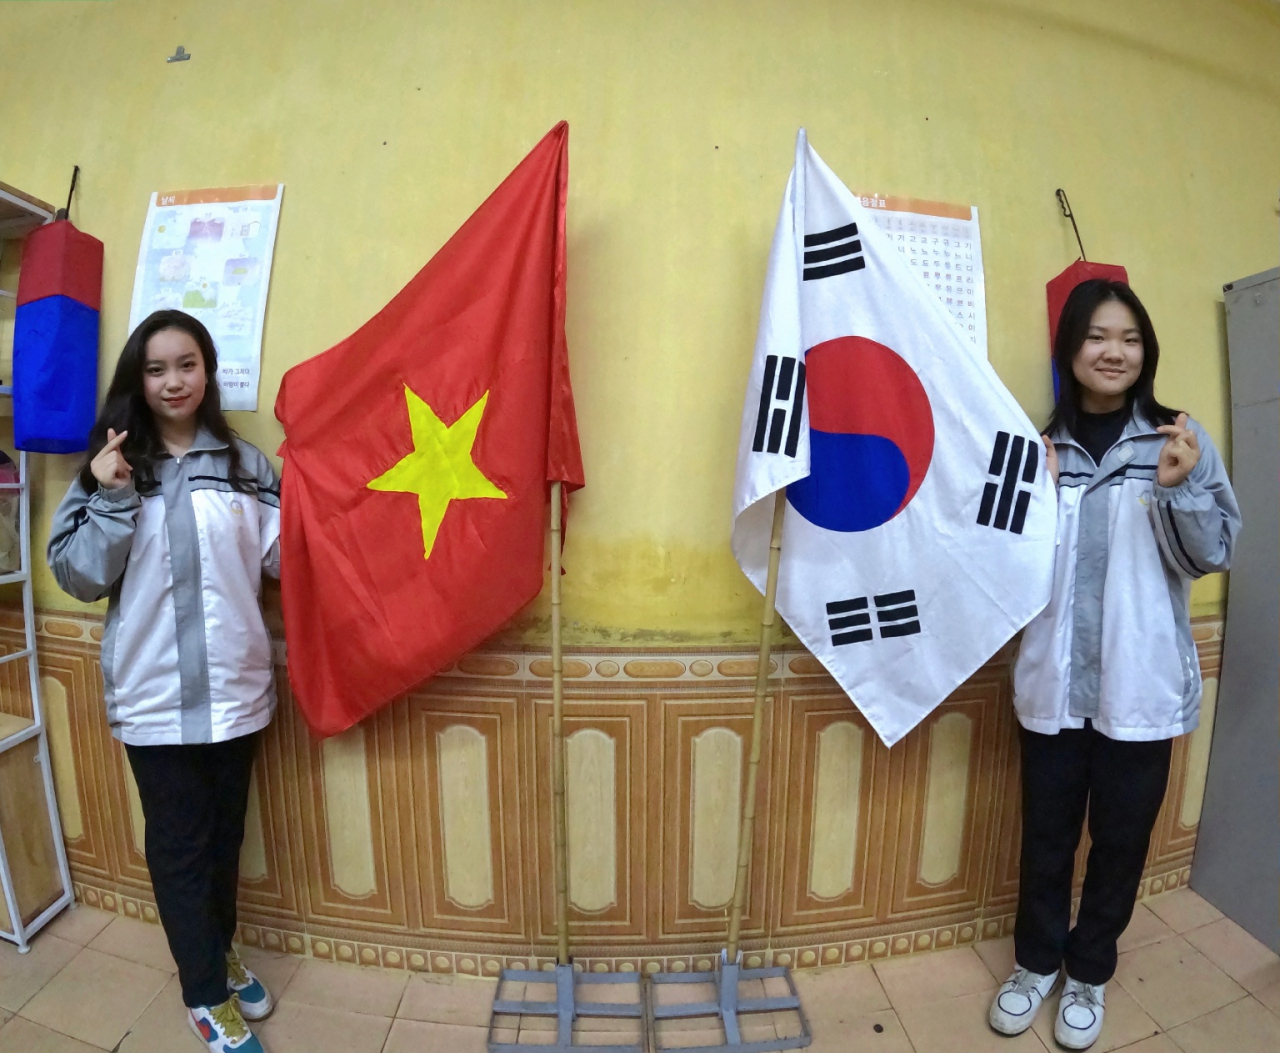 (Left) Dang My Anh and Pham Hai Yen, students in grade 10 at Marie Curie High School in Hai Phong’s Ngo Quyen district, pose for a photo after an interview with The Korea Herald on Feb. 9, 2023. (Choi Jae-hee / The Korea Herald)